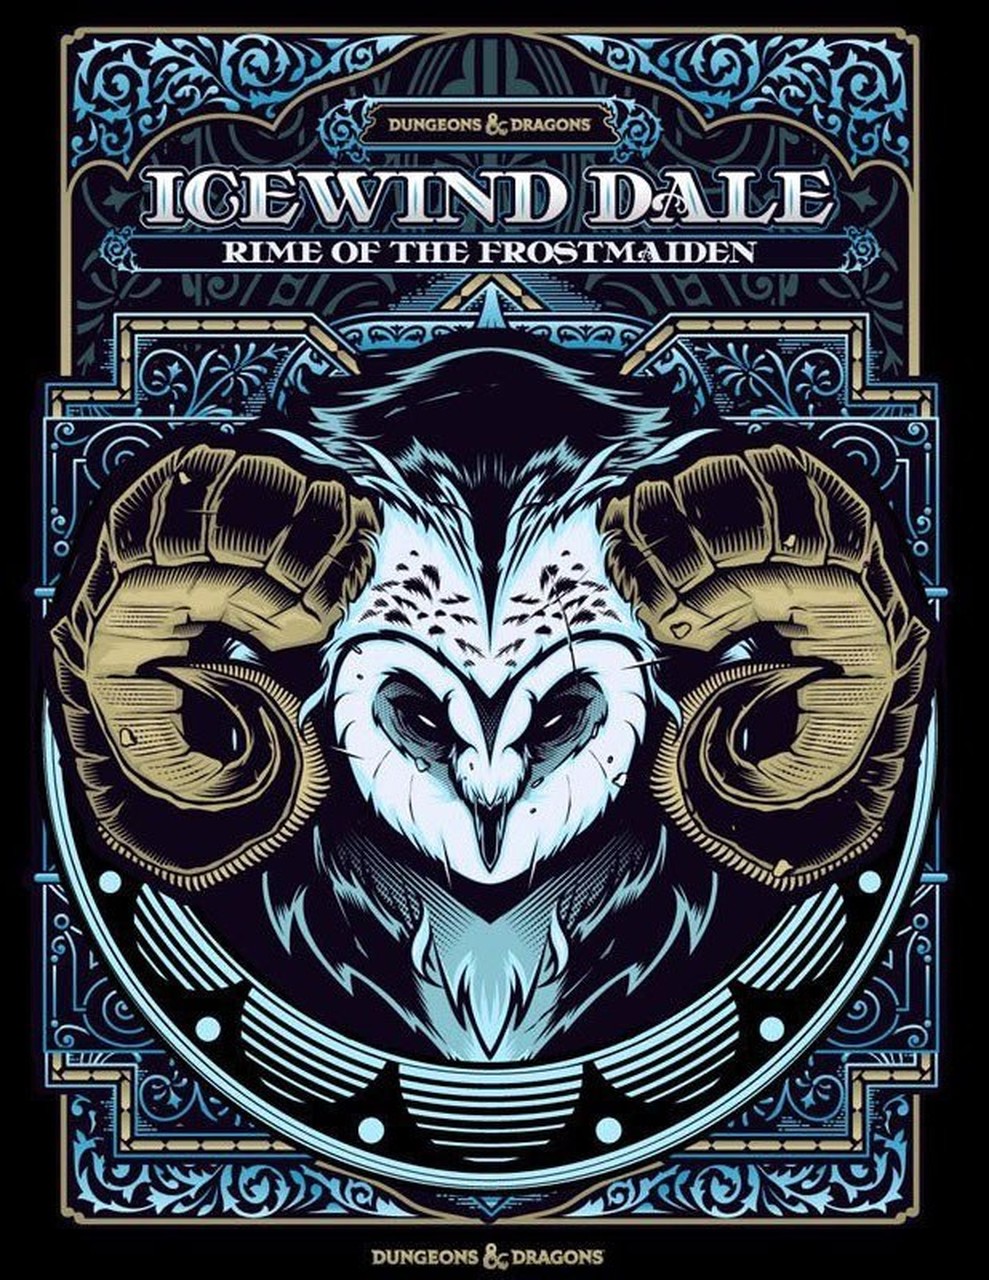 D&D: Icewind Dale: Rime of the Frostmaiden Limited Edition Alternate Cover